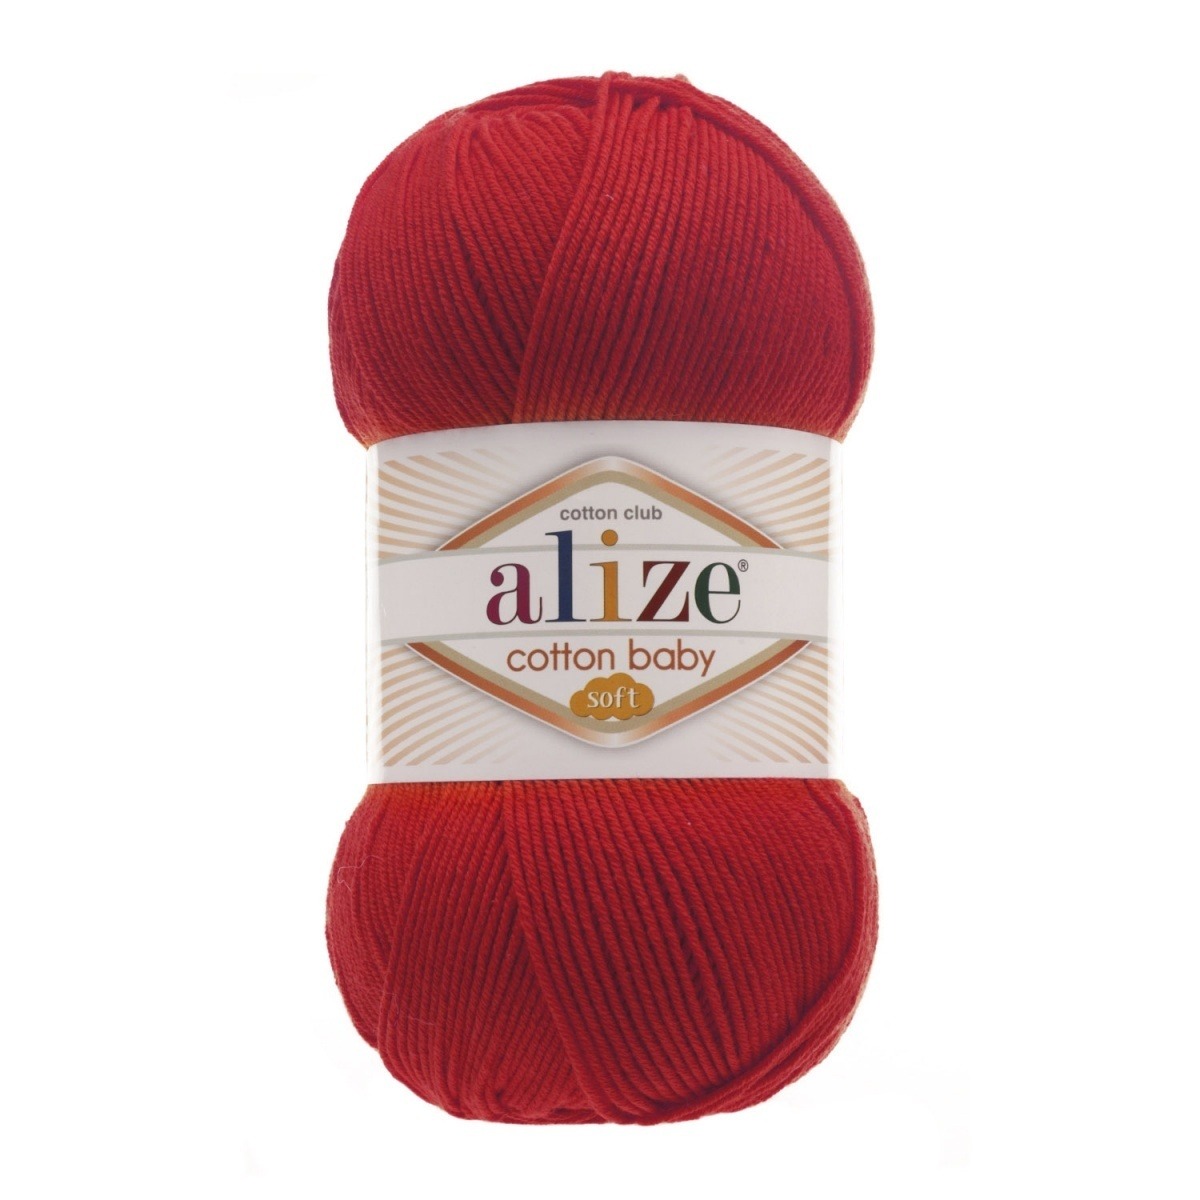 Alize "Cotton baby soft" (56)